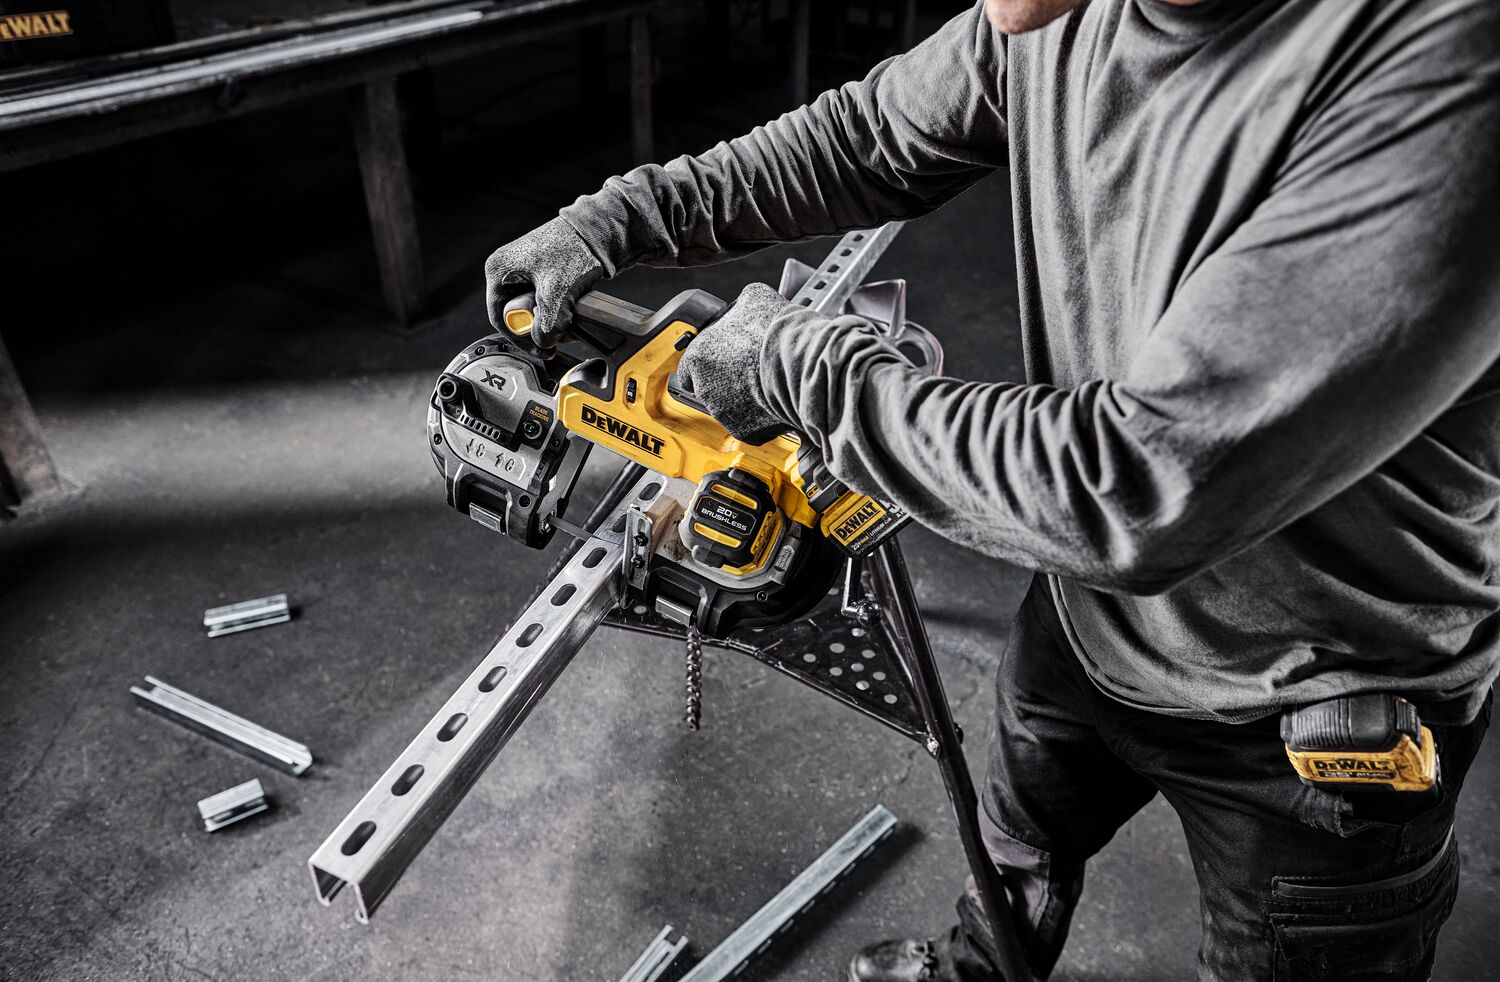 DEWALT Single Trigger Bandsaw is used to cut strut from a pipe stand in a mechanical room.